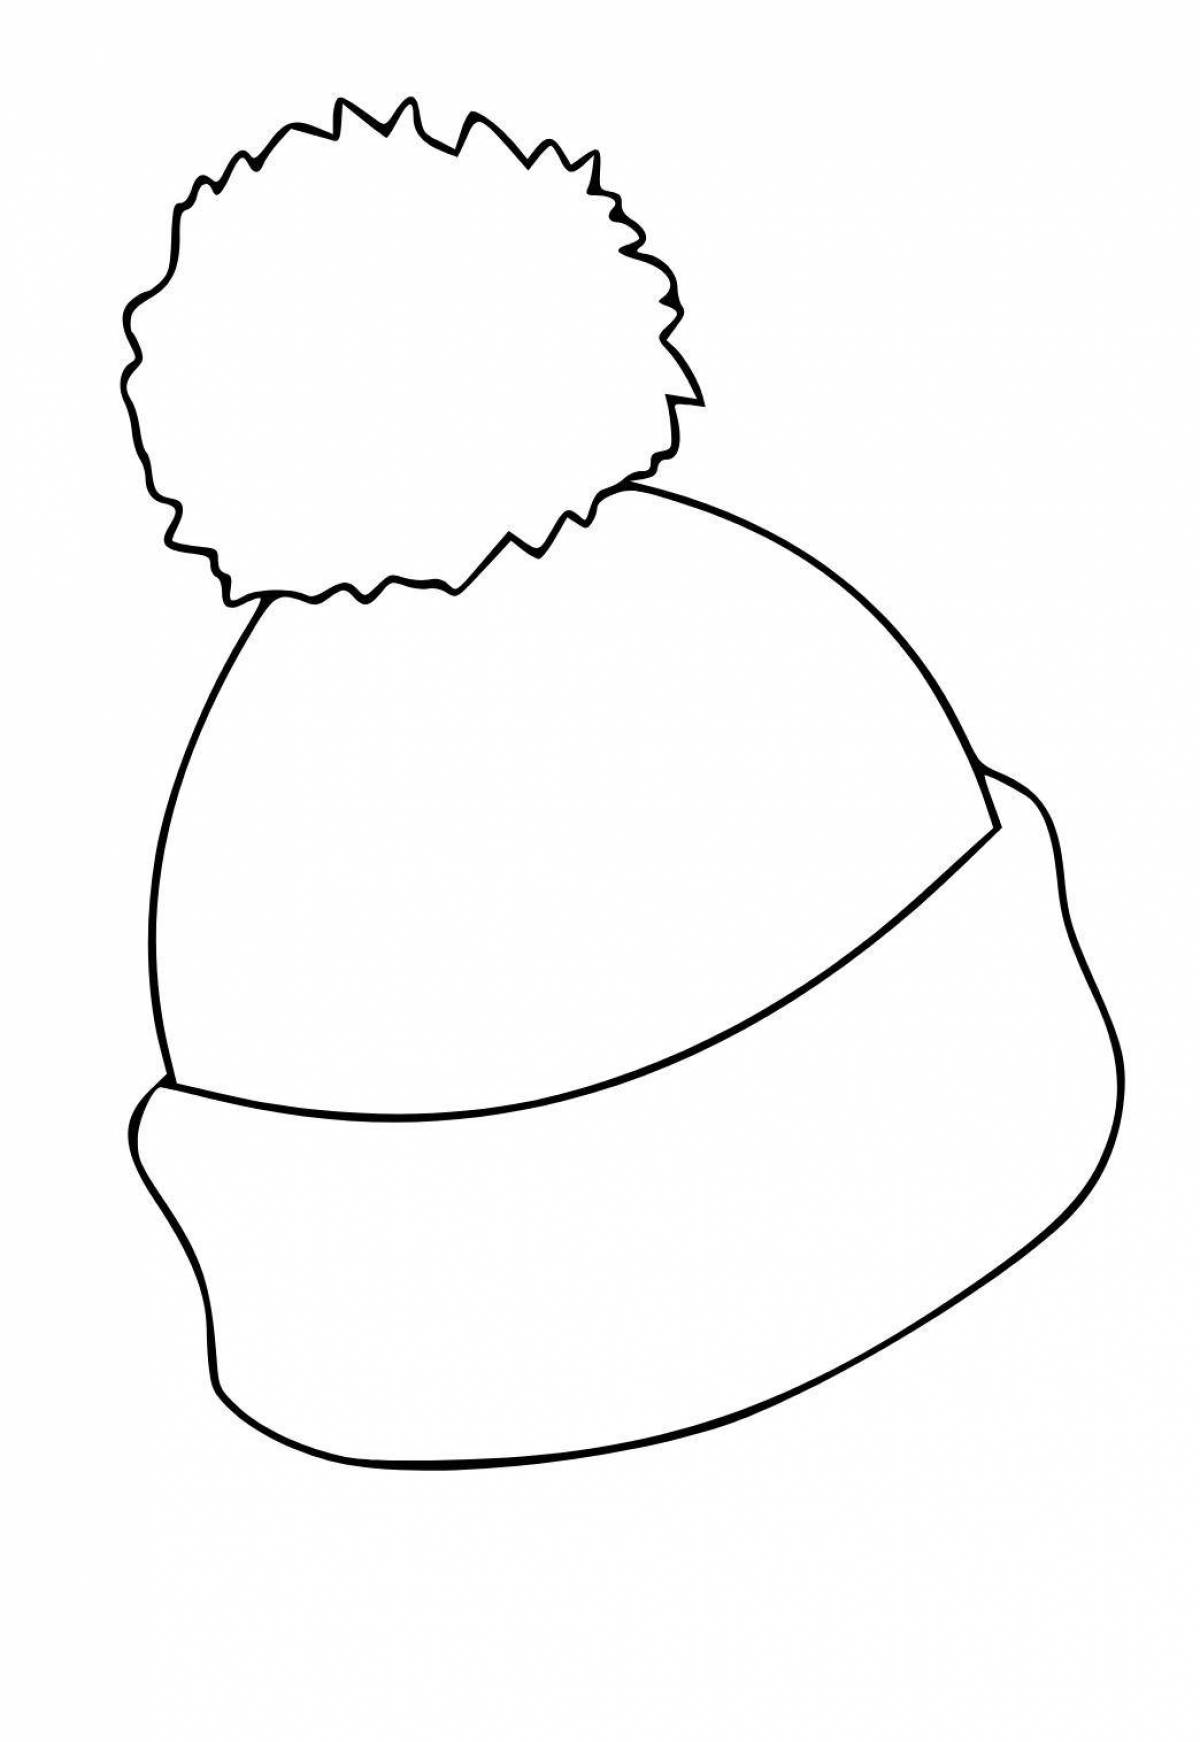 Fun mittens and hat coloring book for preschoolers